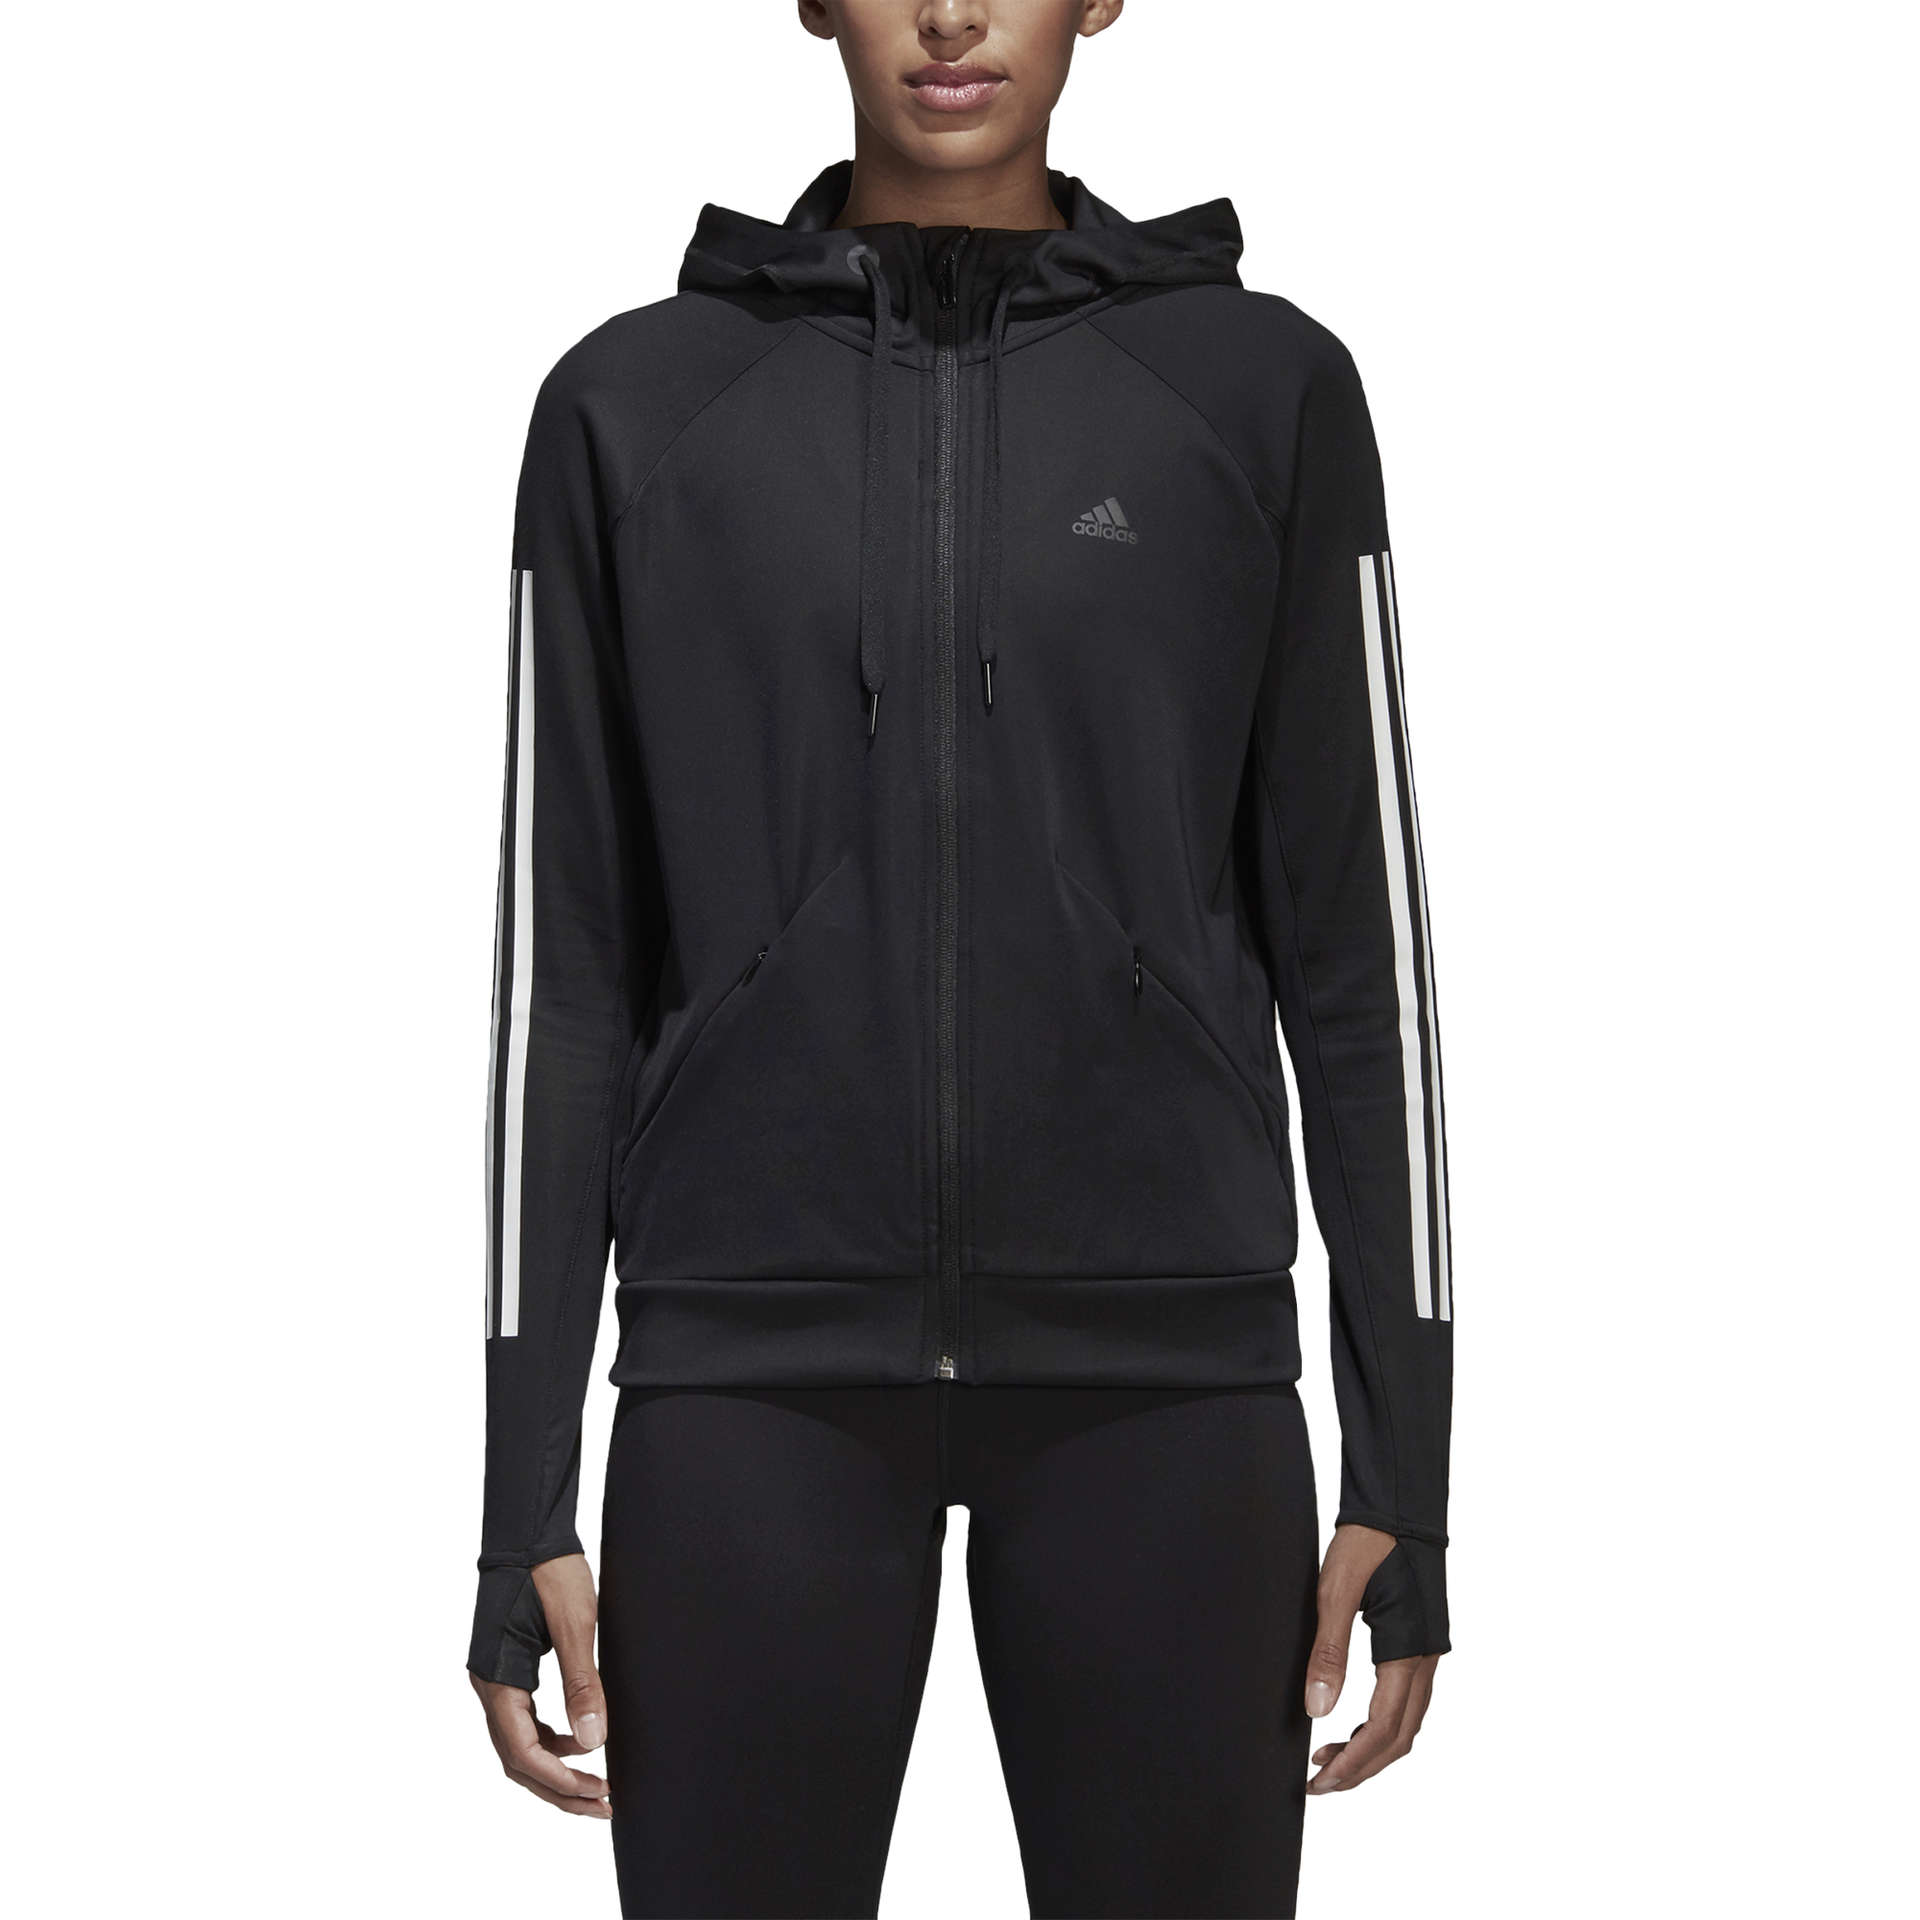 adidas performance vest dames Off 65% - www.bashhguidelines.org